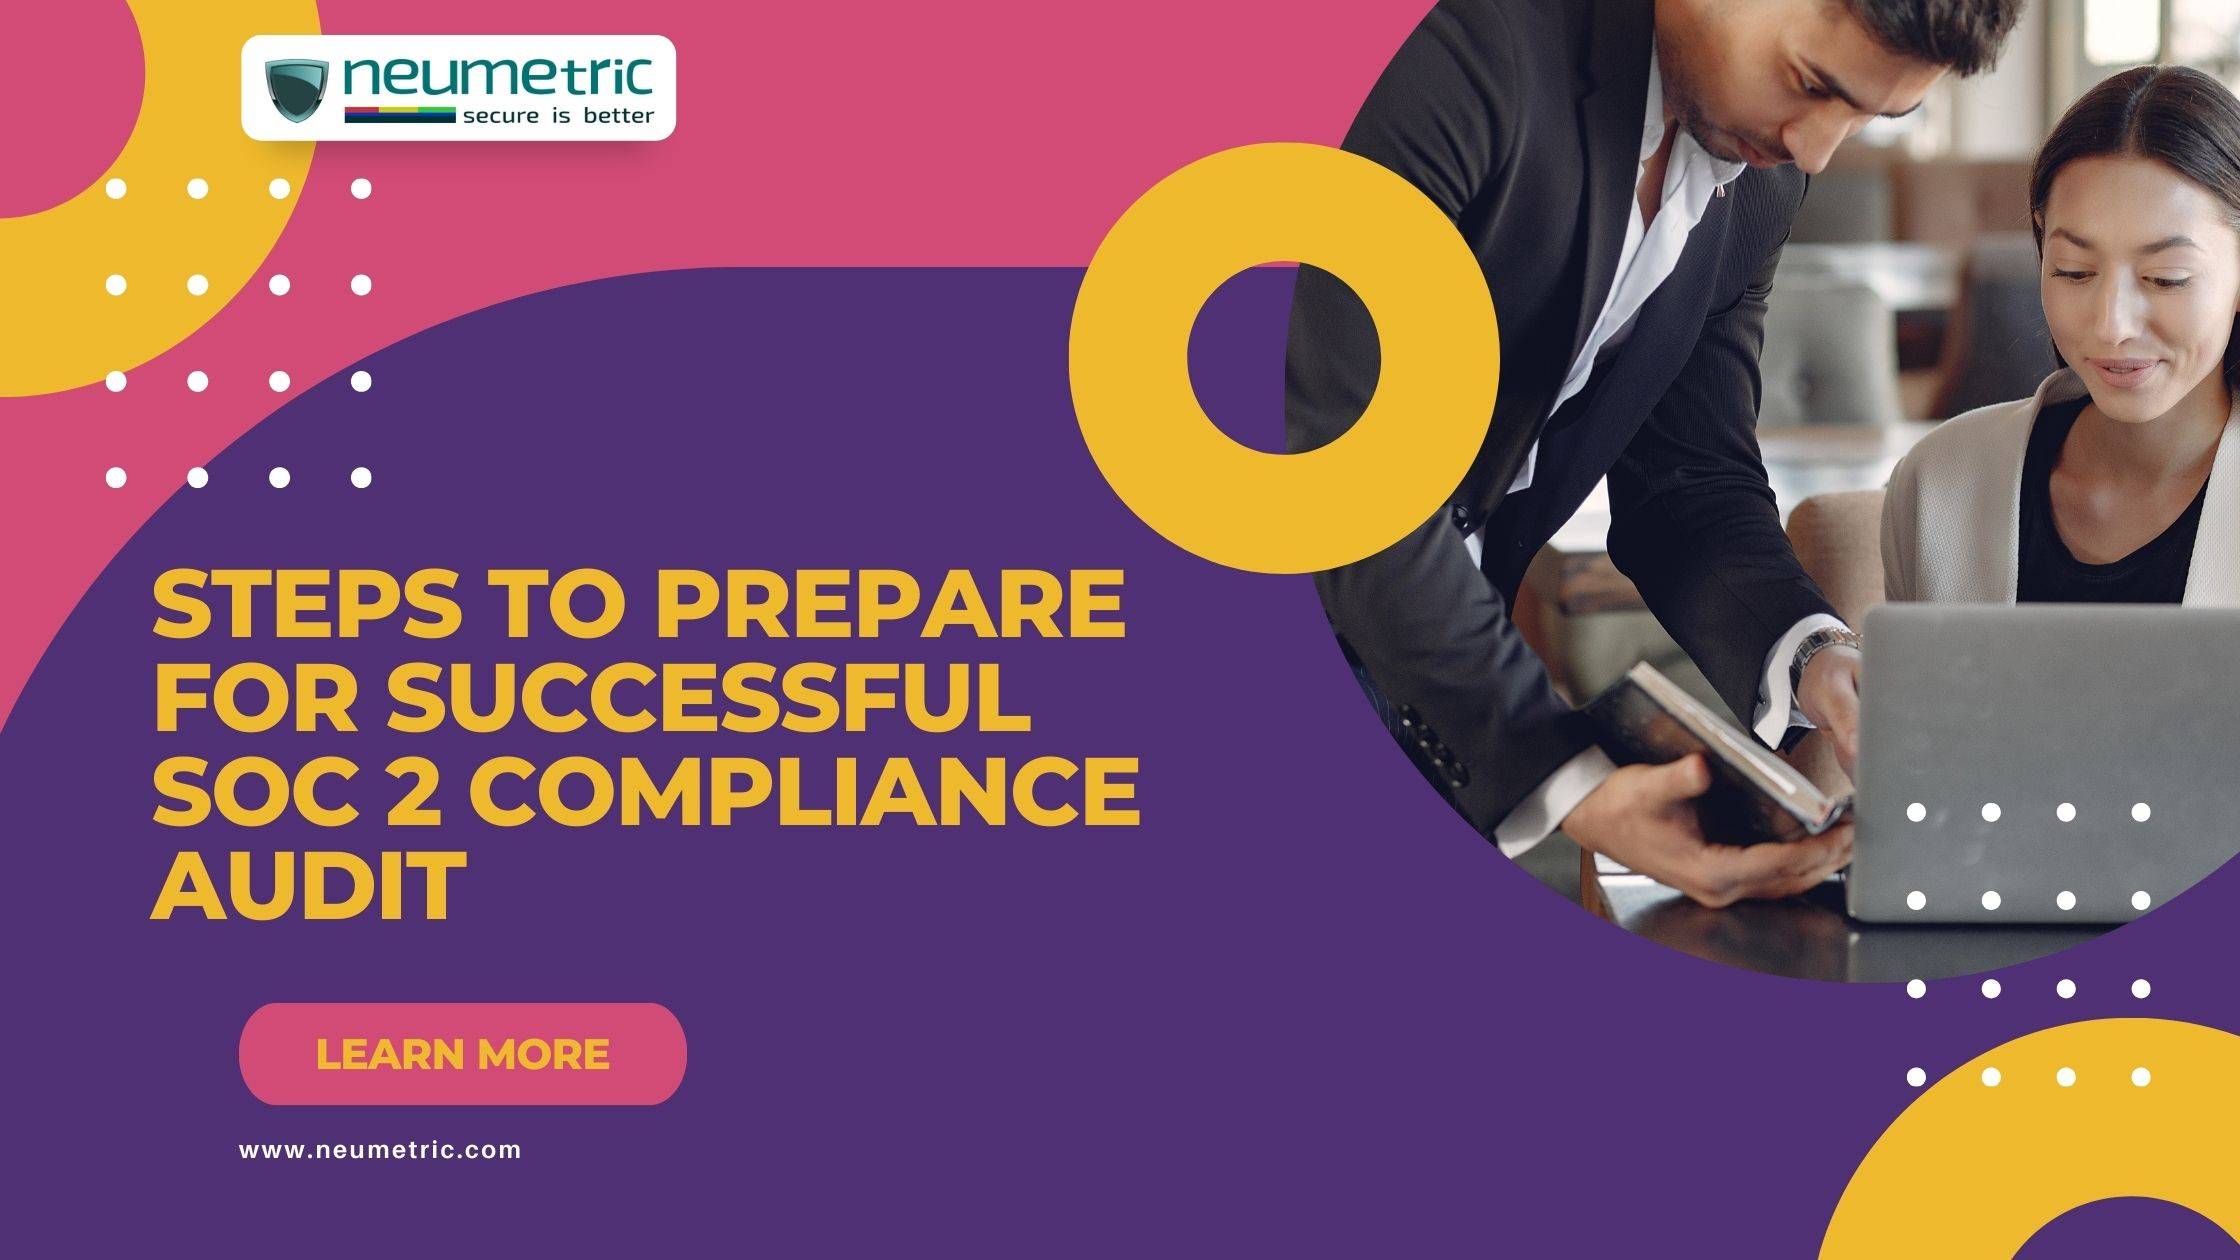 Steps To Prepare For Successful SOC 2 Compliance Audit